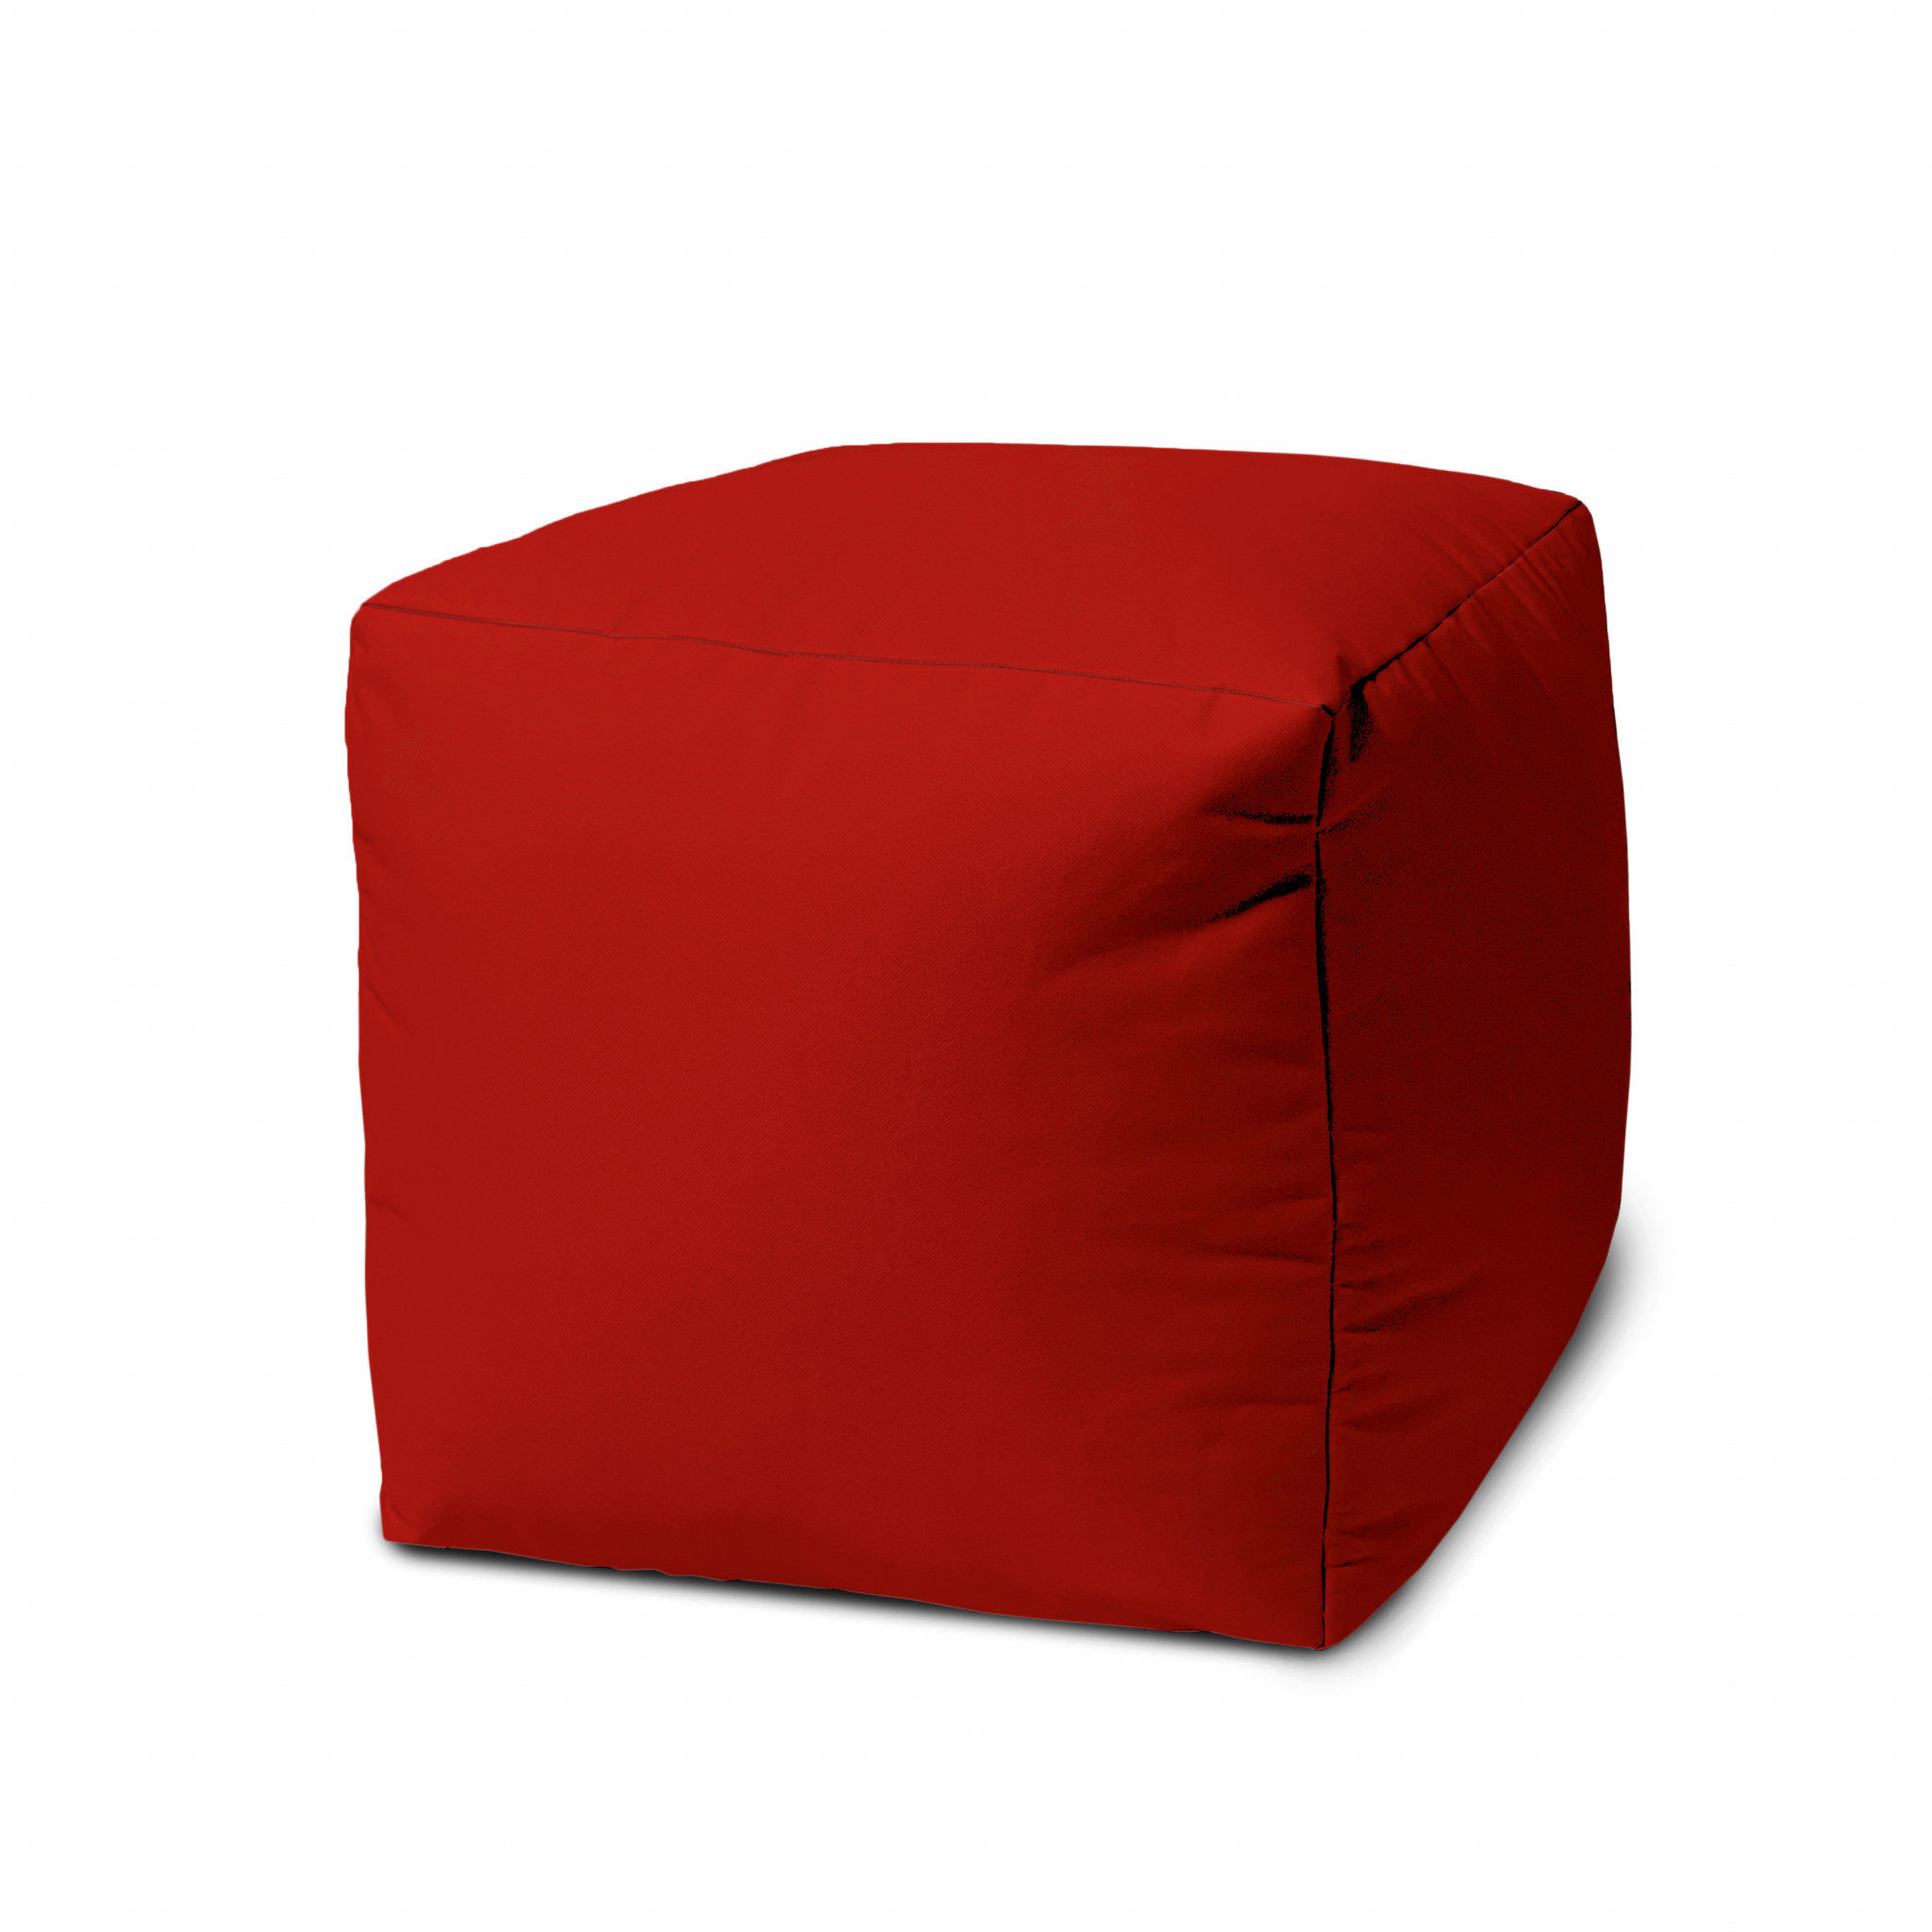 17" Cool Primary Red Solid Color Indoor Outdoor Pouf Ottoman-474171-1